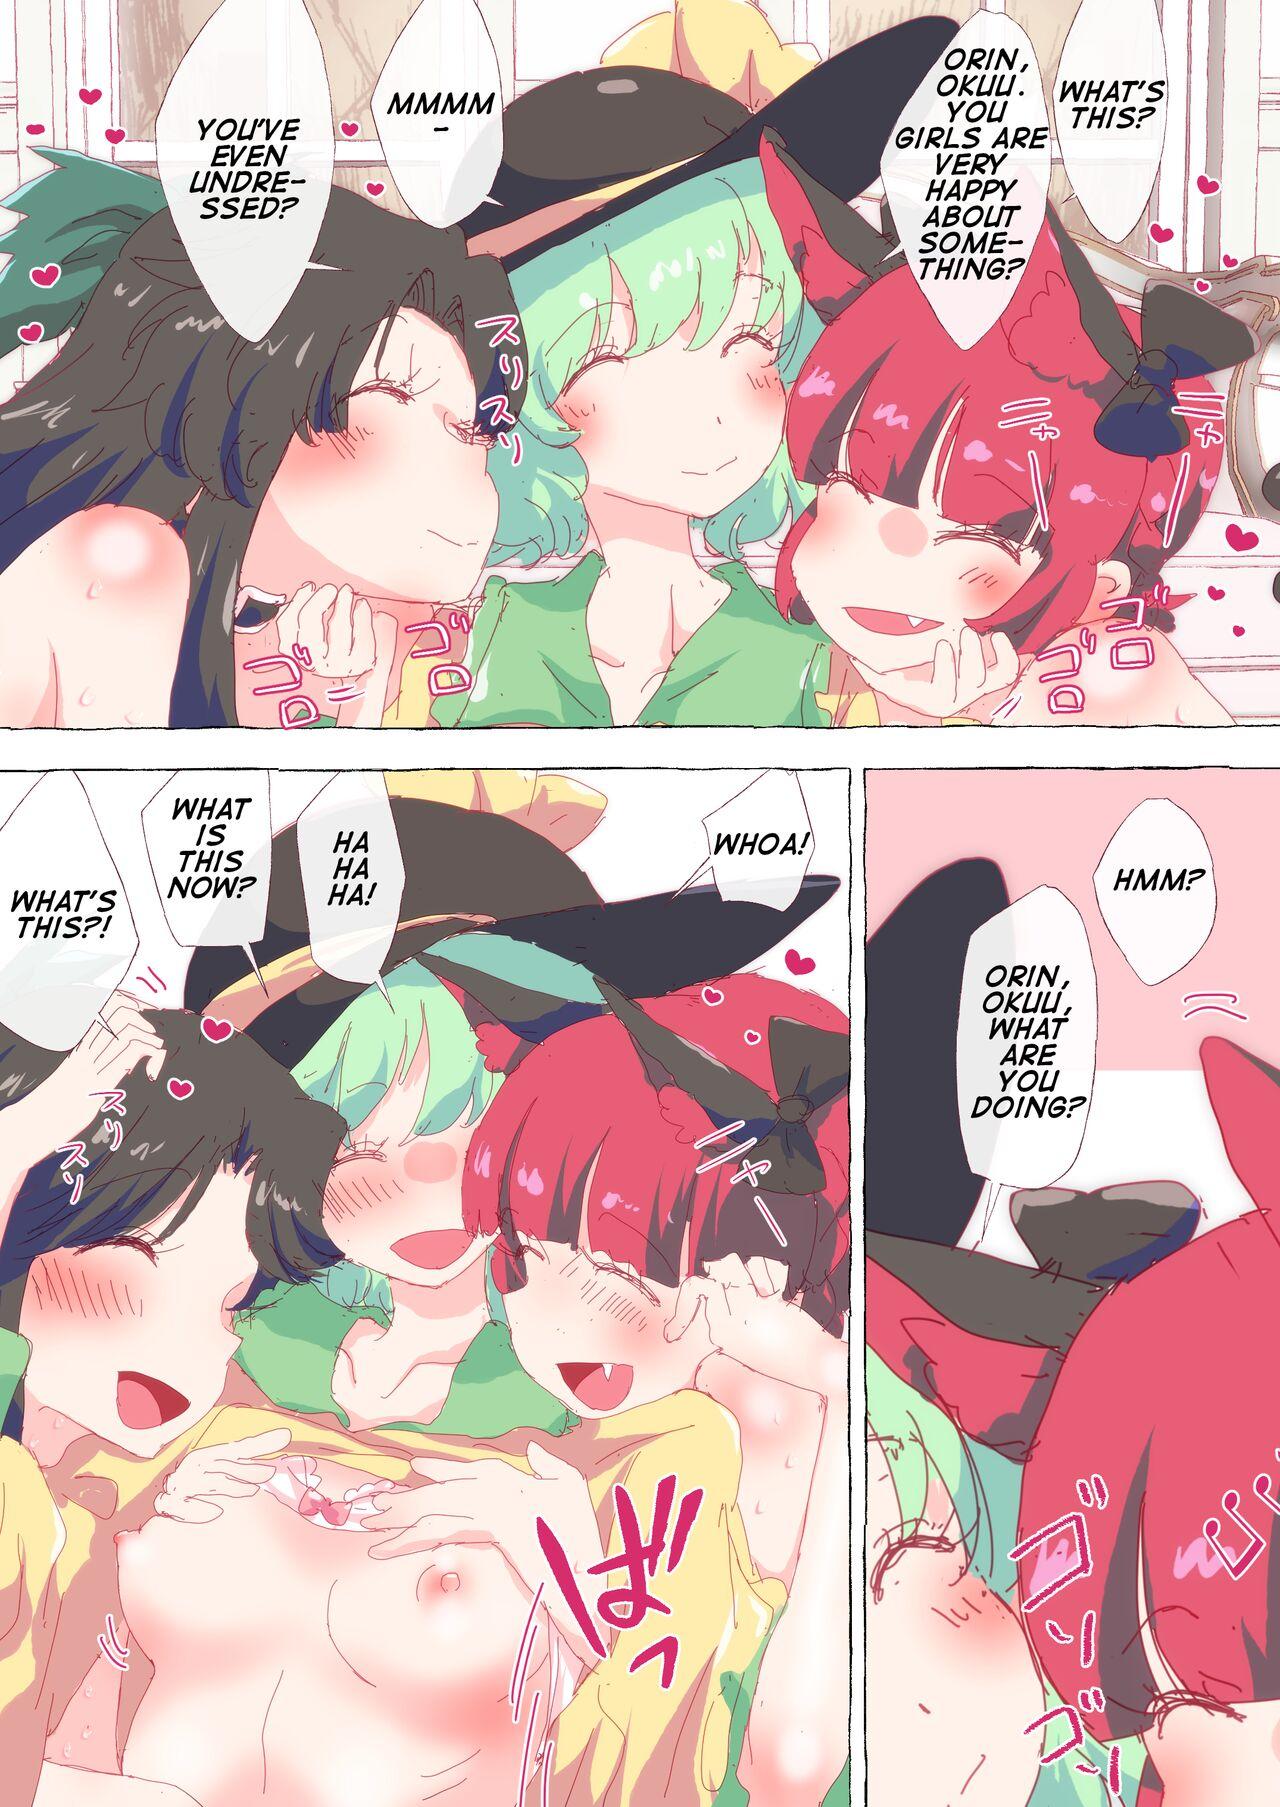 Married Koishi-chan caught by Orin and Okuu in heat - Touhou project Cam Girl - Page 1